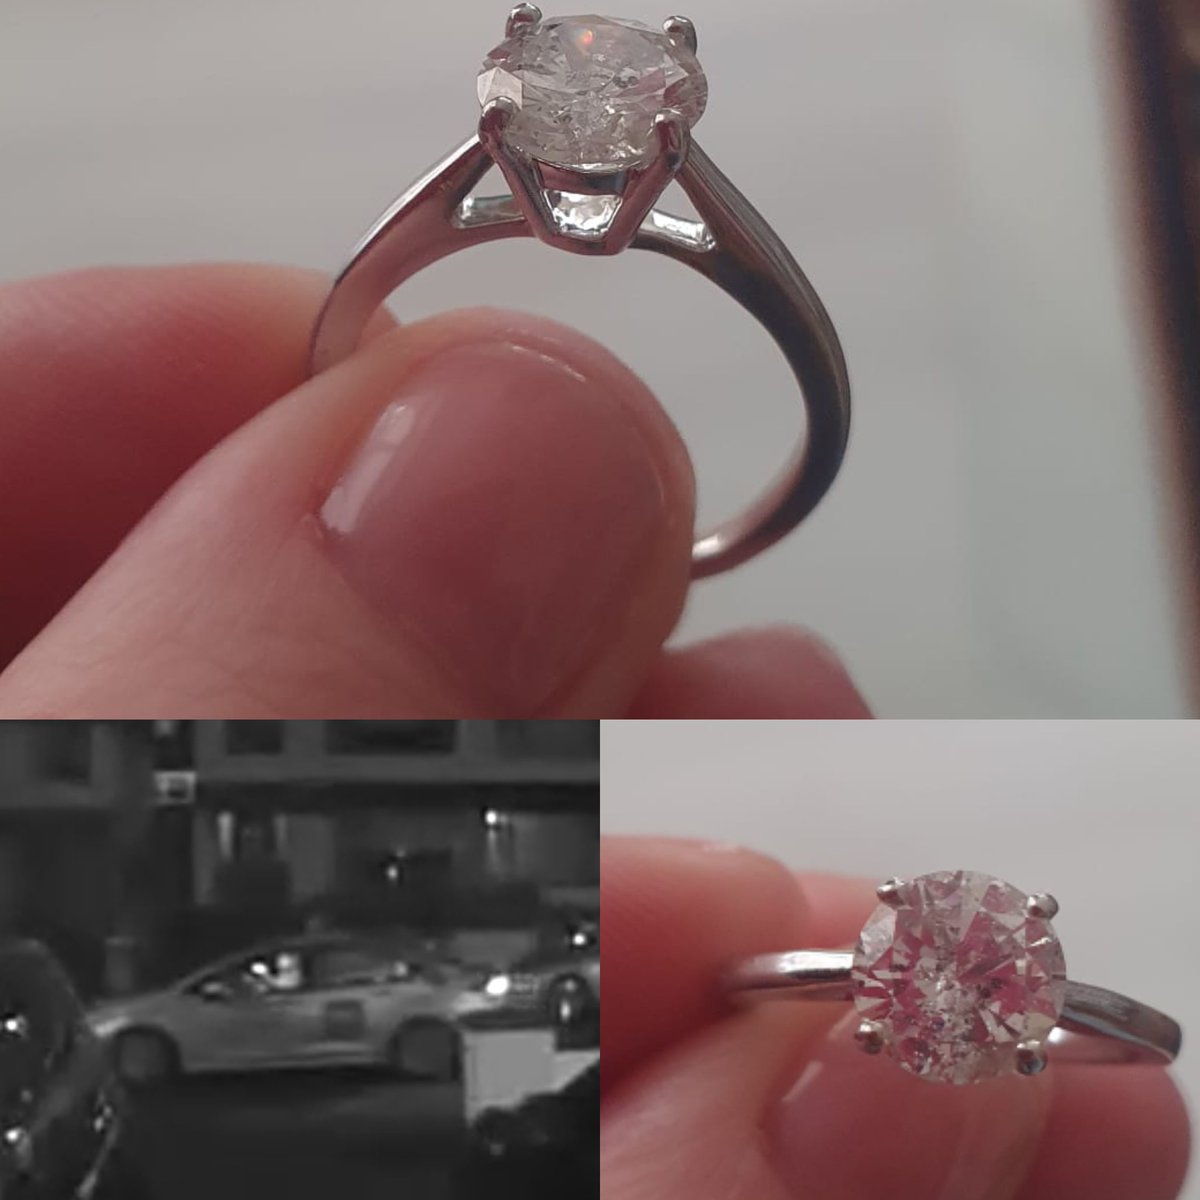 Wishing for a miracle. Would appreciate a RT and any advice. Last night at midnight myself & Orla got a Dublin Taxi from Baggot St. We had the engagement ring only two days. We left it in the back of the taxi. Absolutely devastated. We got the taxi on the road and paid cash.